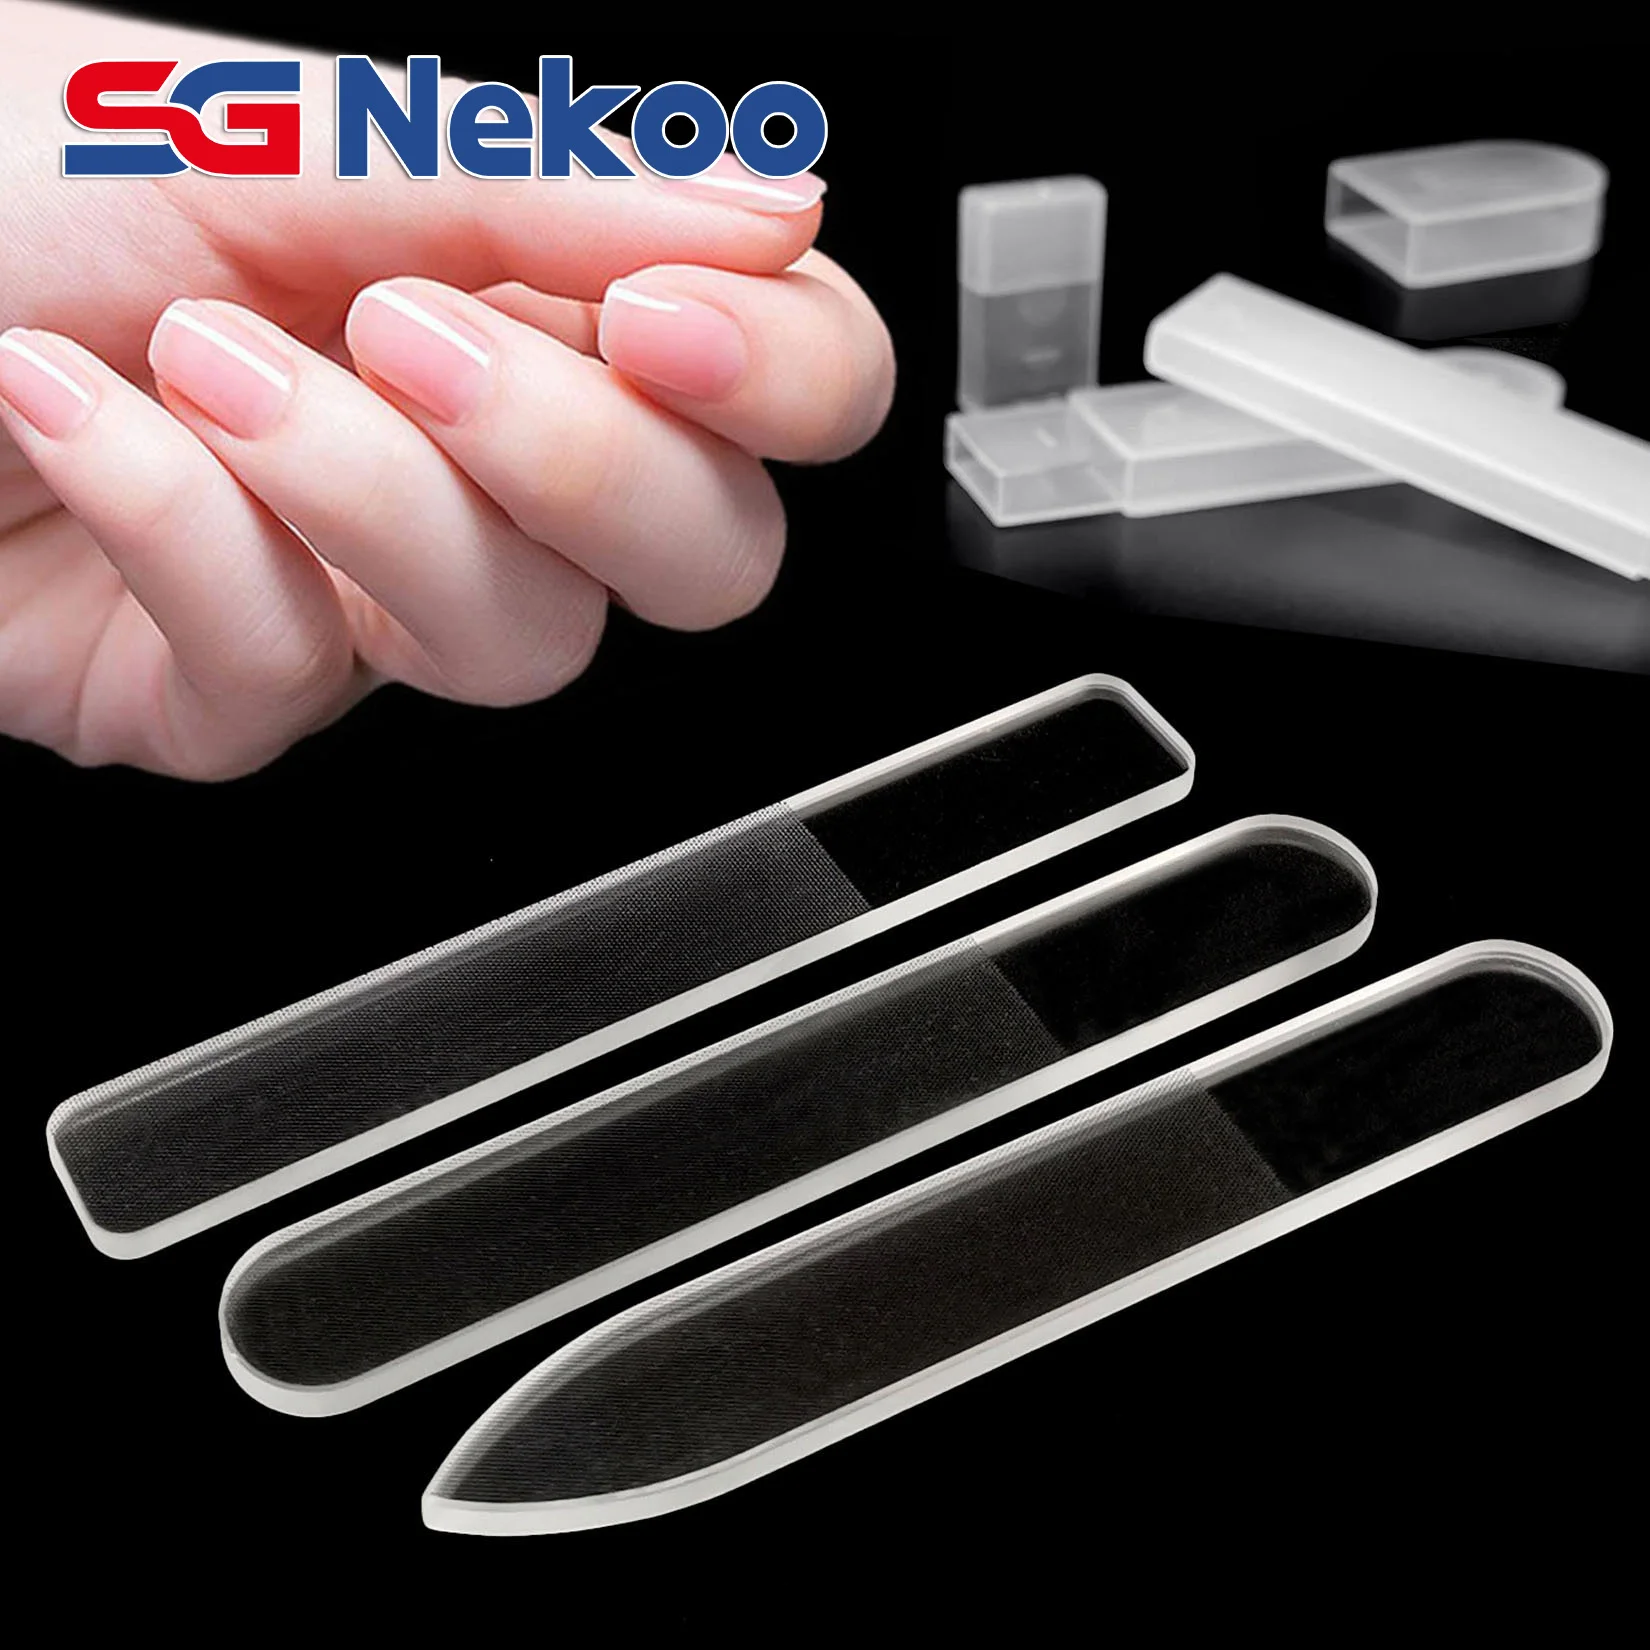 

SGNEKOO Professional Nano Glass Nail Files for Natural Nails Polishing Strip Polisher Grinding Shiner Manicure Tool with Case